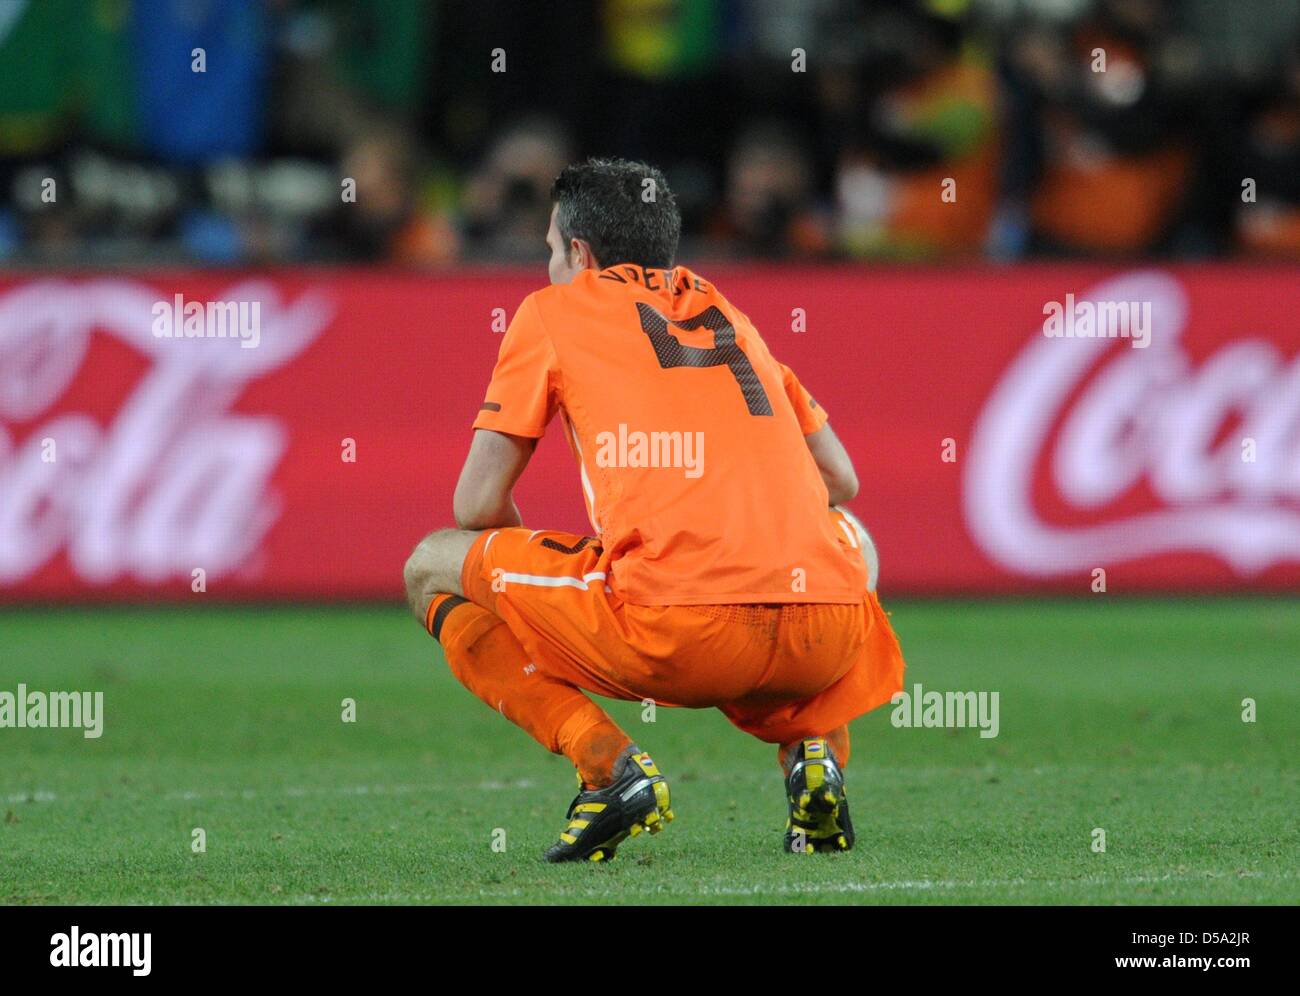 Robin van Persie of the Netherlands reacts during the 2010 FIFA World Cup final match between the Netherlands and Spain at the Soccer City Stadium in Johannesburg, South Africa 11 July 2010. Photo: Bernd Weissbrod dpa - Please refer to http://dpaq.de/FIFA-WM2010-TC  +++(c) dpa - Bildfunk+++ Stock Photo